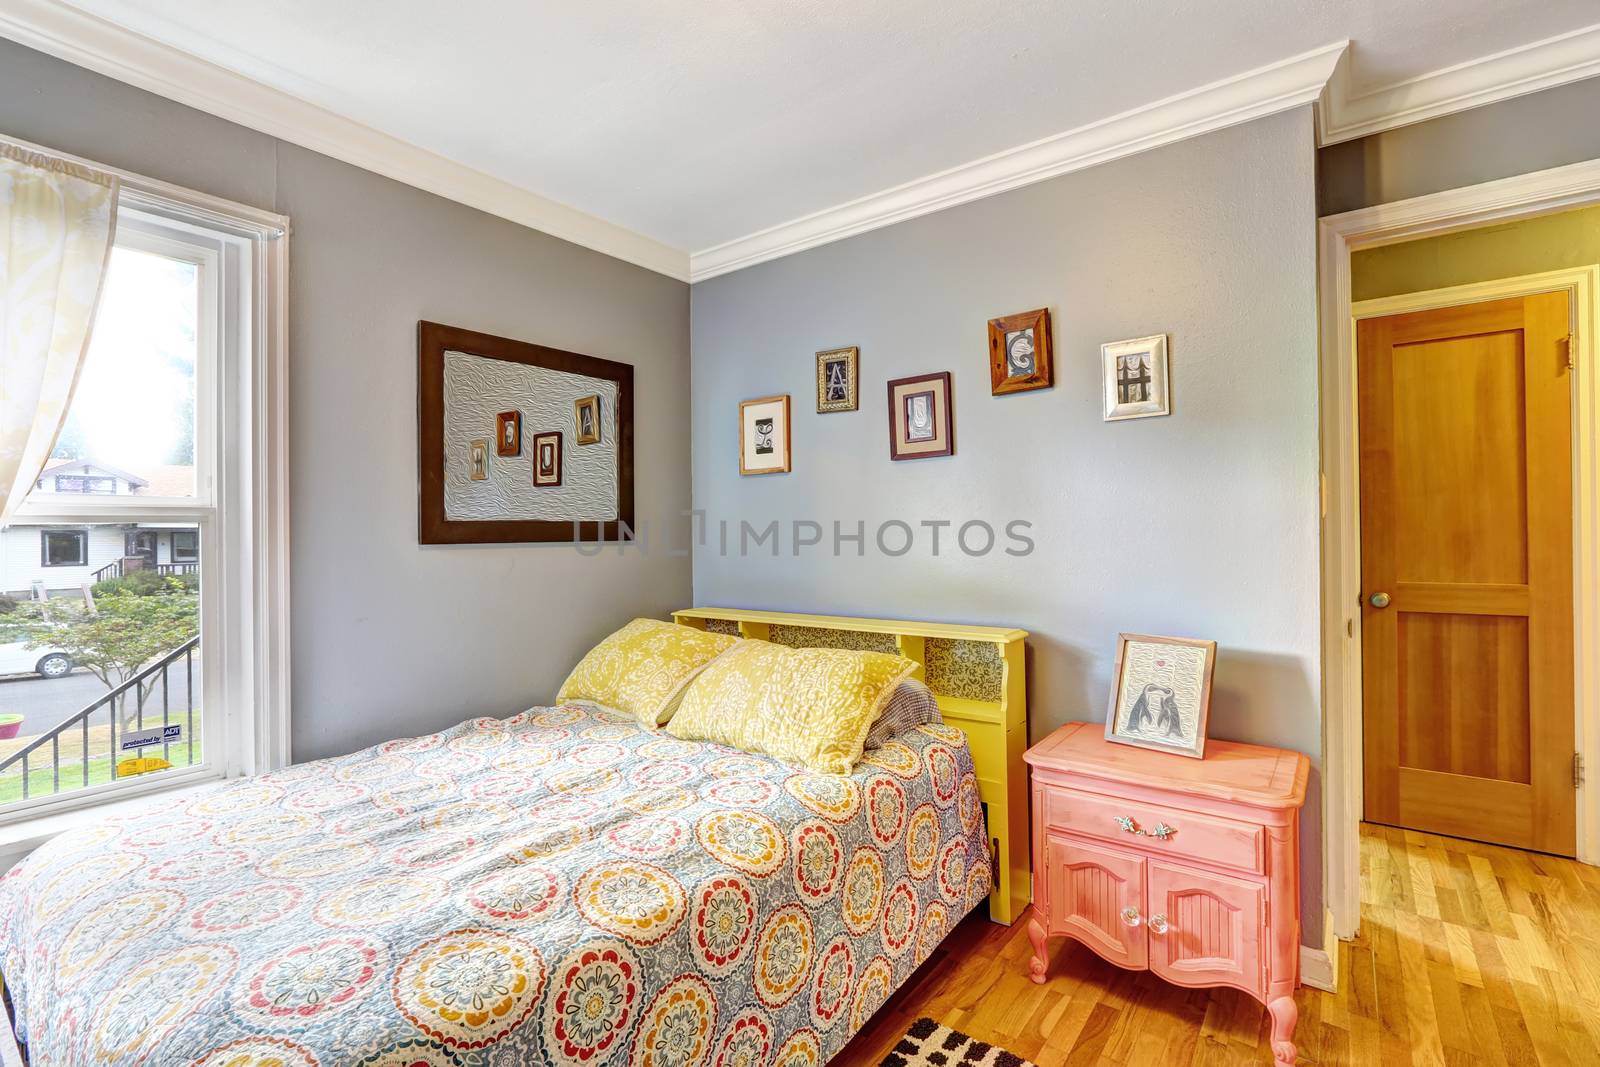 Simple bedroom with light blue walls. Bed decorated with yellow pillows. Antique pink nightstand